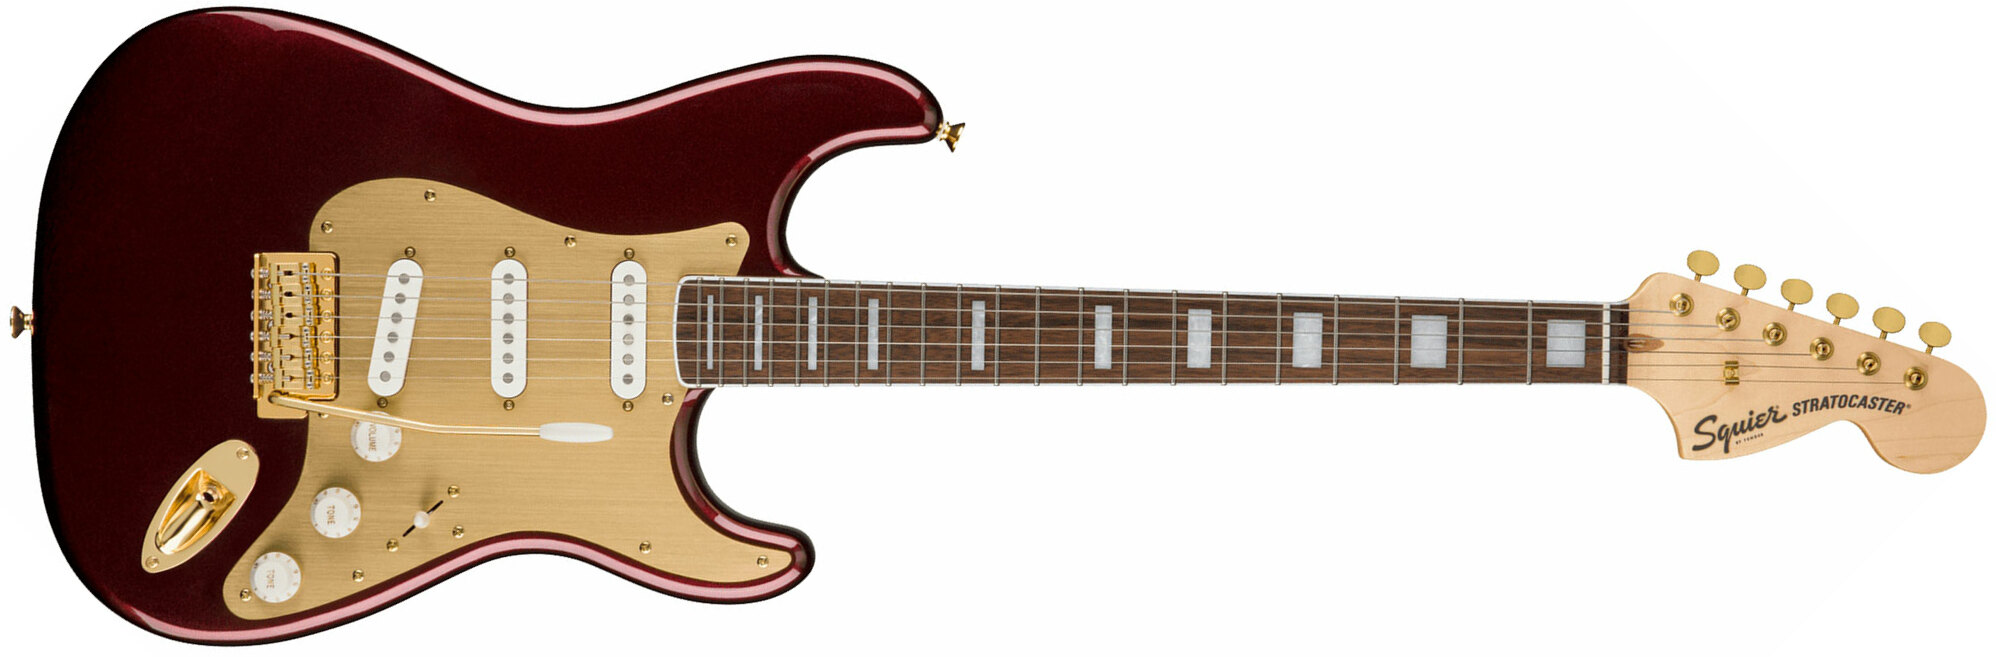 Squier Strat 40th Anniversary Gold Edition Lau - Ruby Red Metallic - Guitare Électrique Forme Str - Main picture